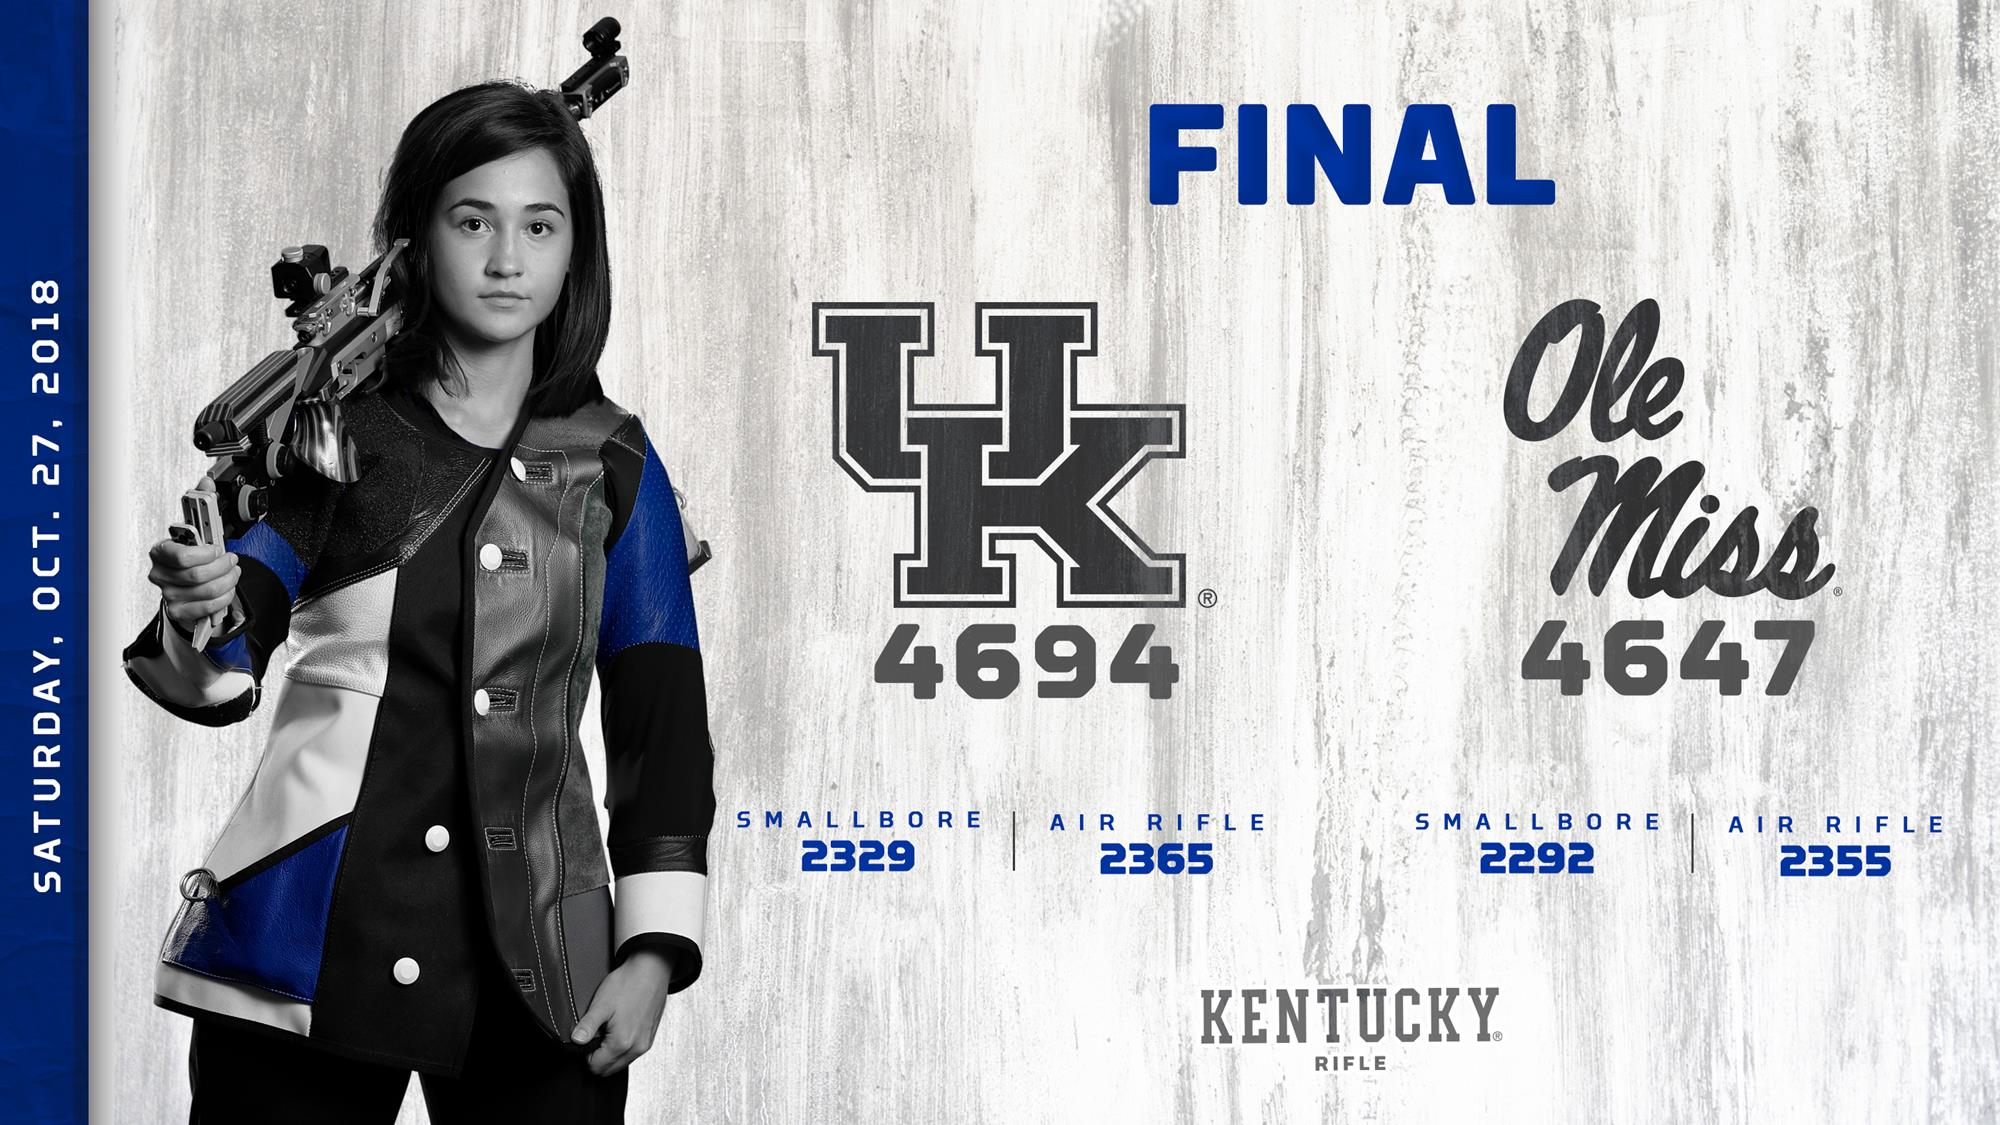 Kentucky Rifle Starts Weekend with 4694 at Ole Miss